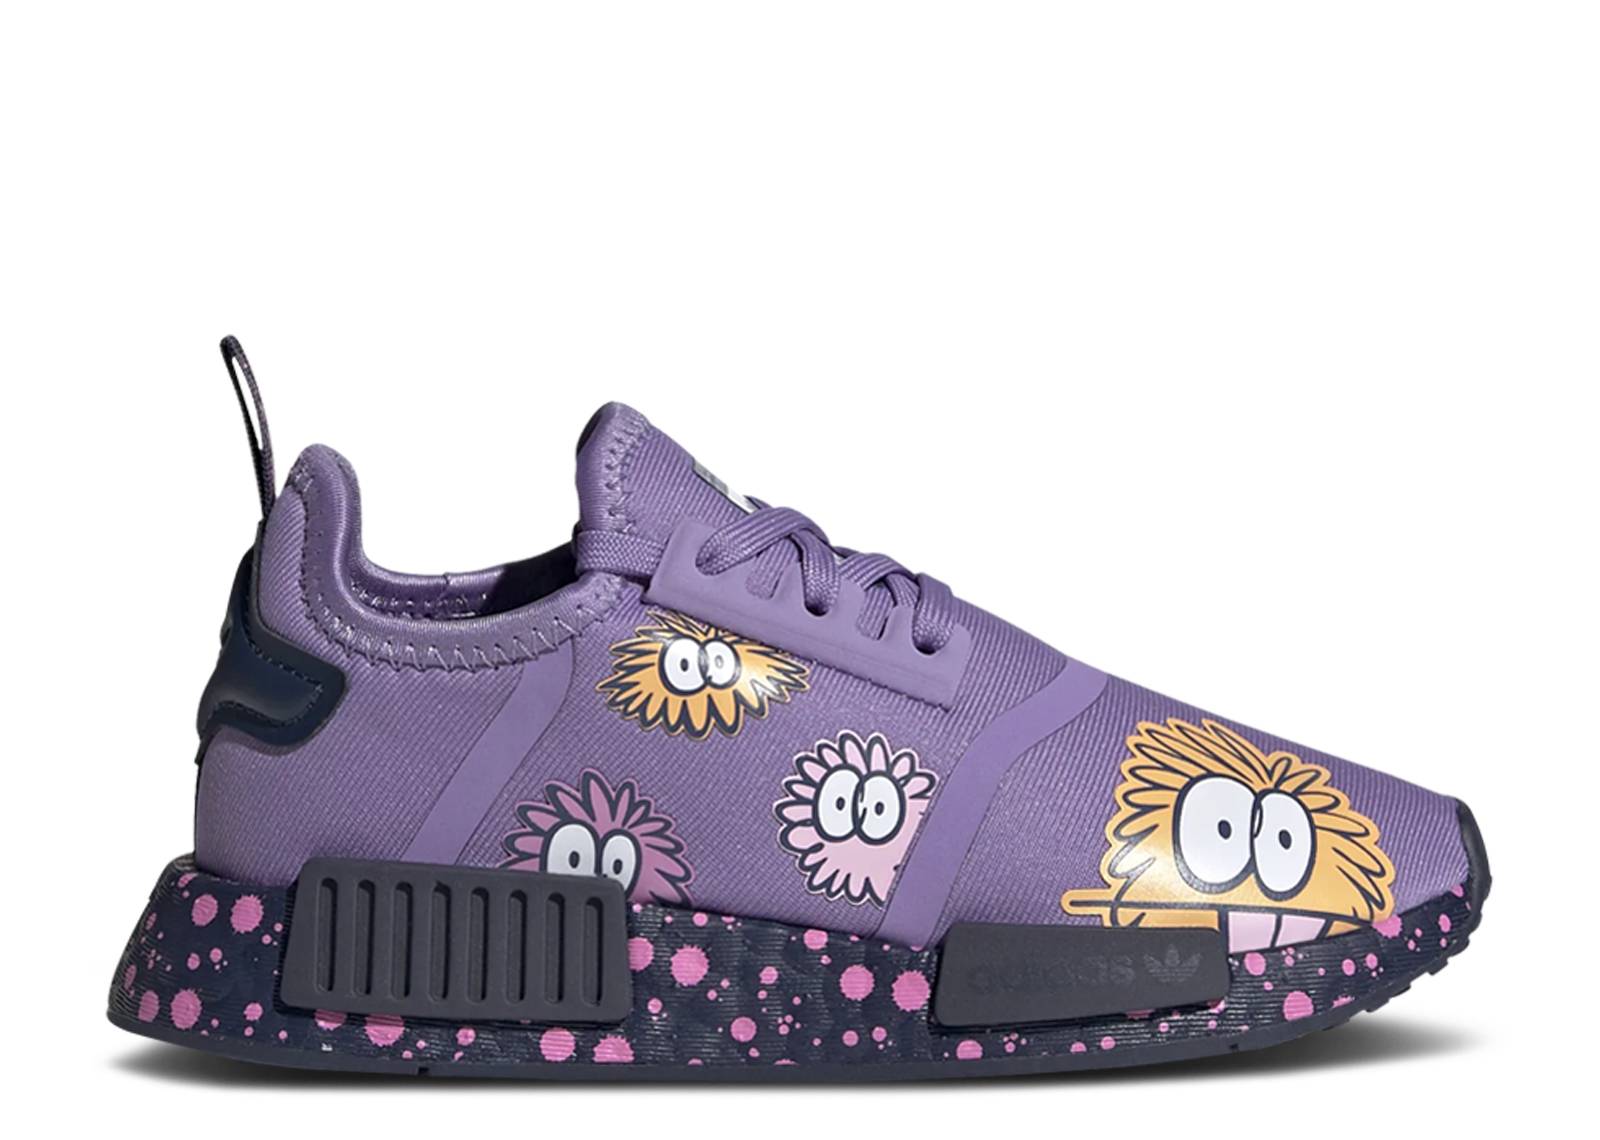 Kevin Lyons x NMD_R1 J 'Monster'